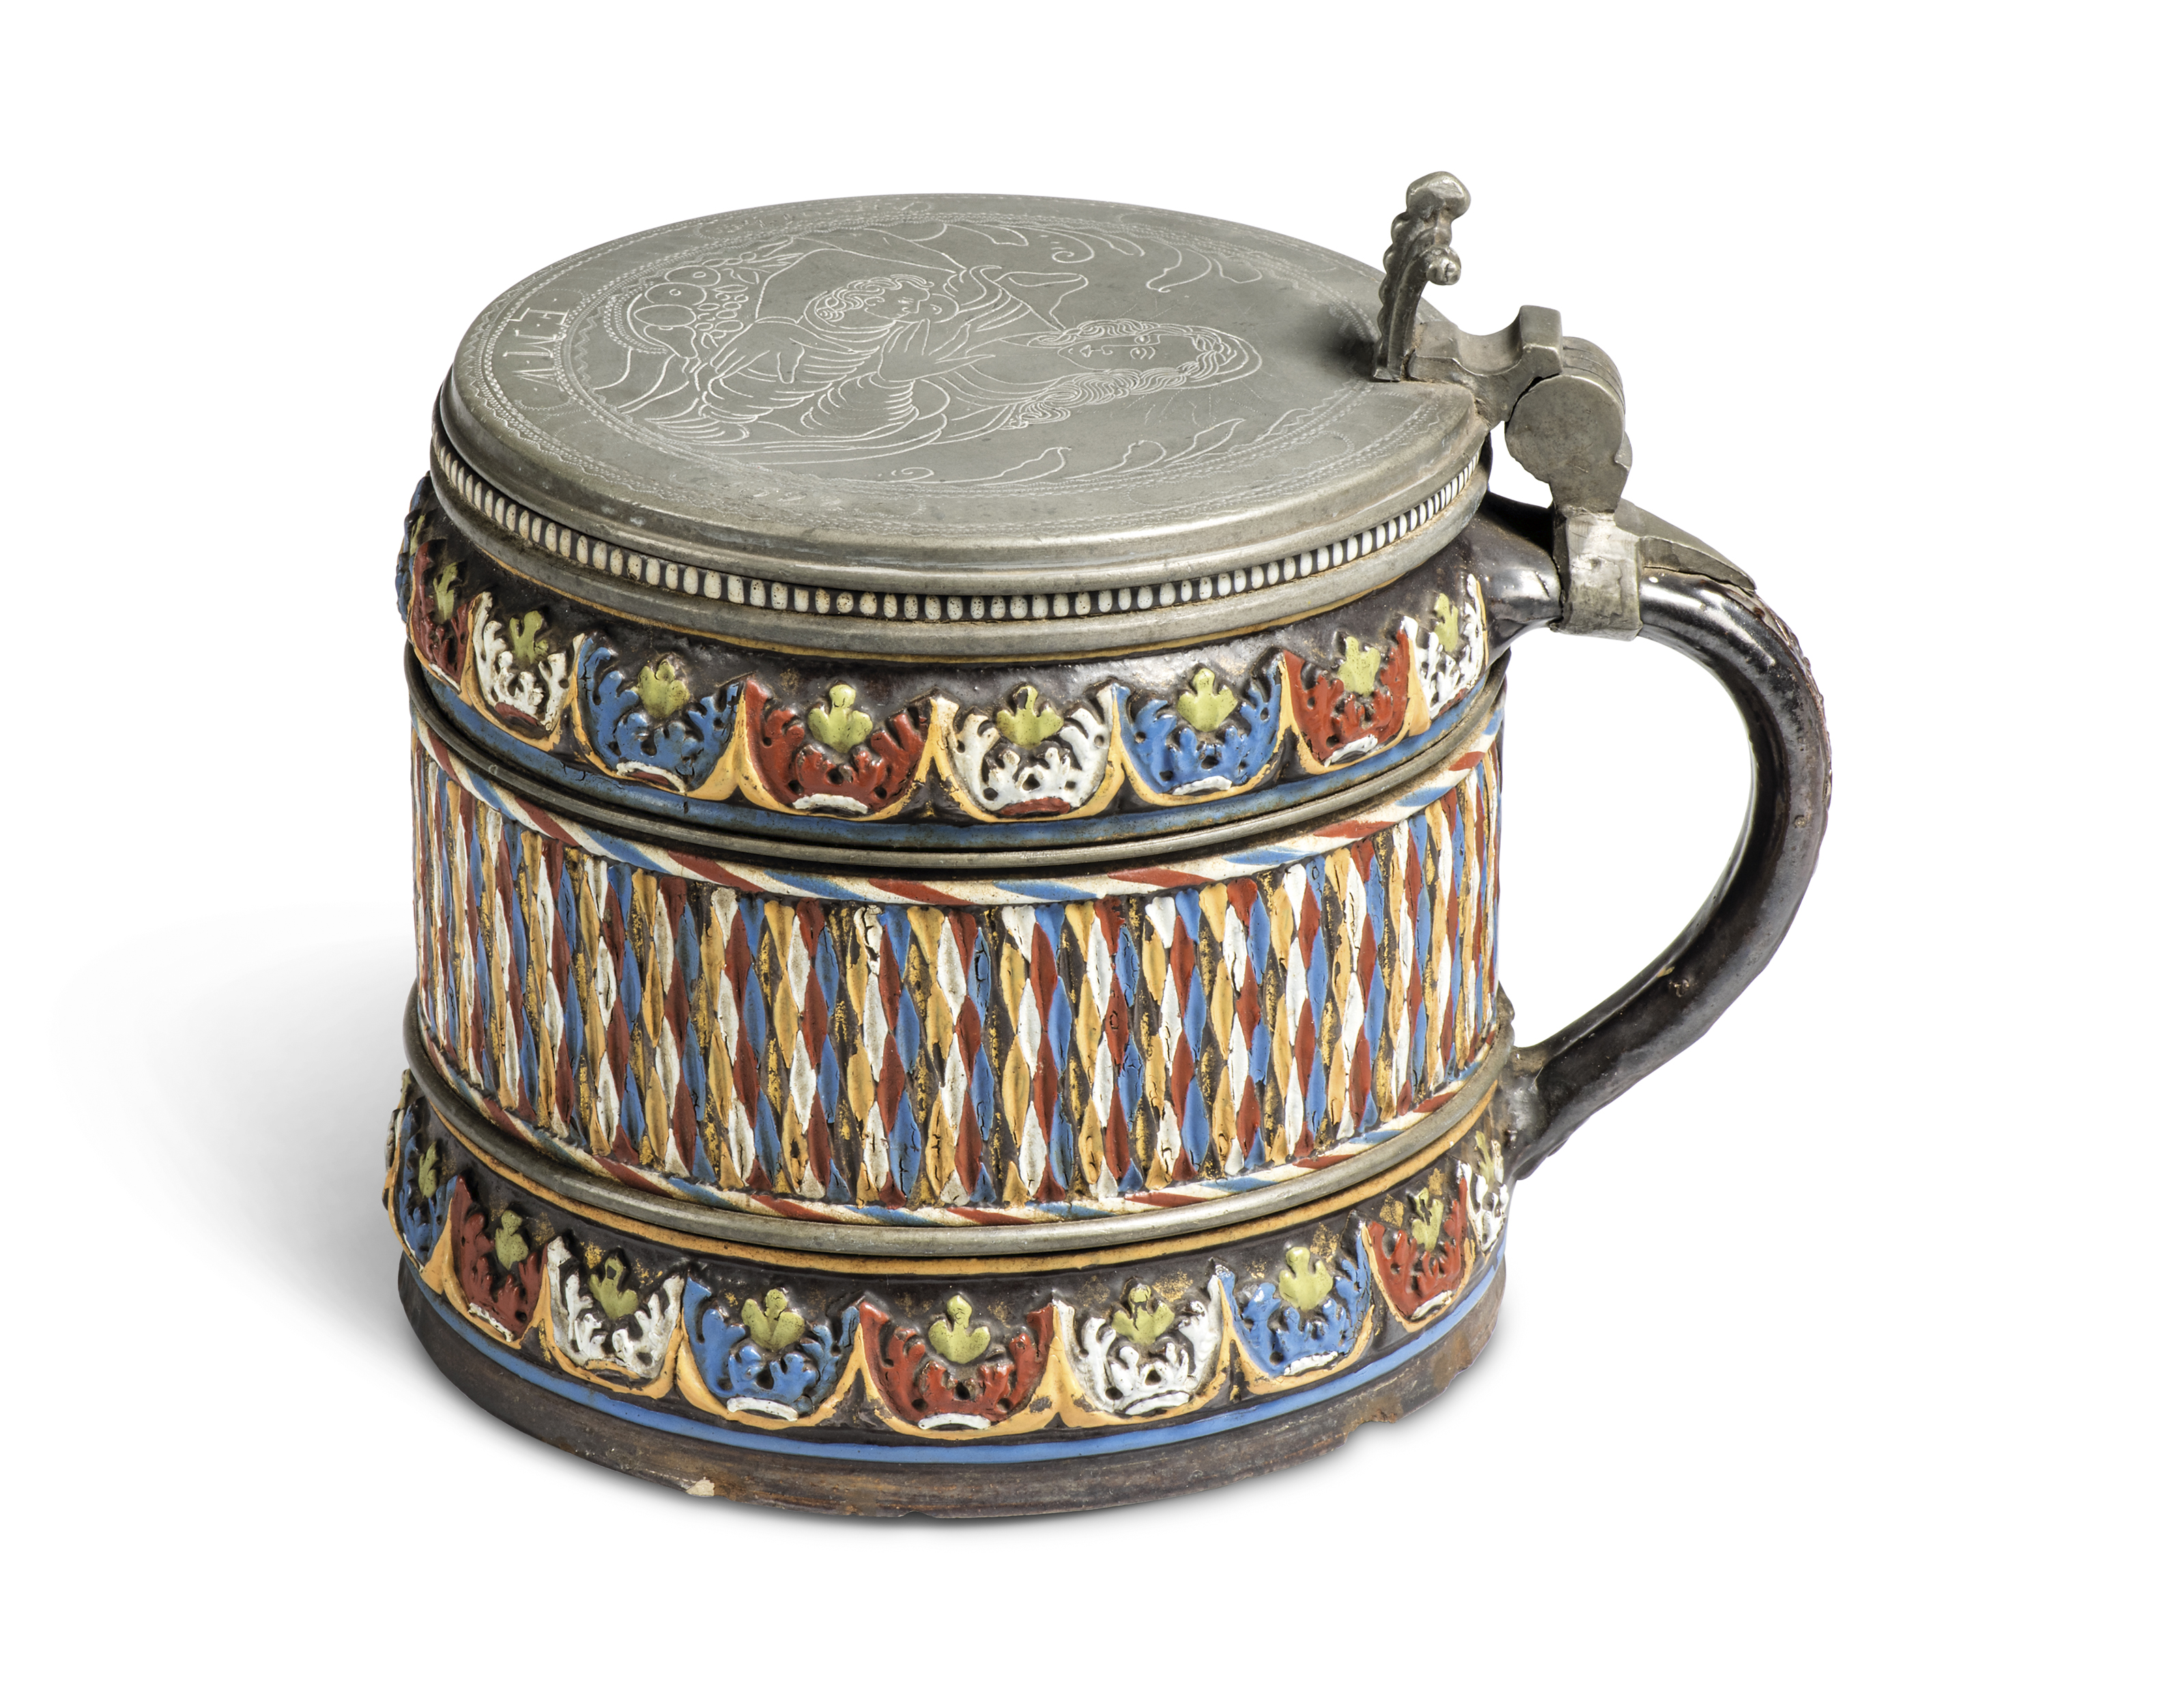 A pewter mounted German stoneware bierkrug, probably Creussen, probably 17th century, with a broa...